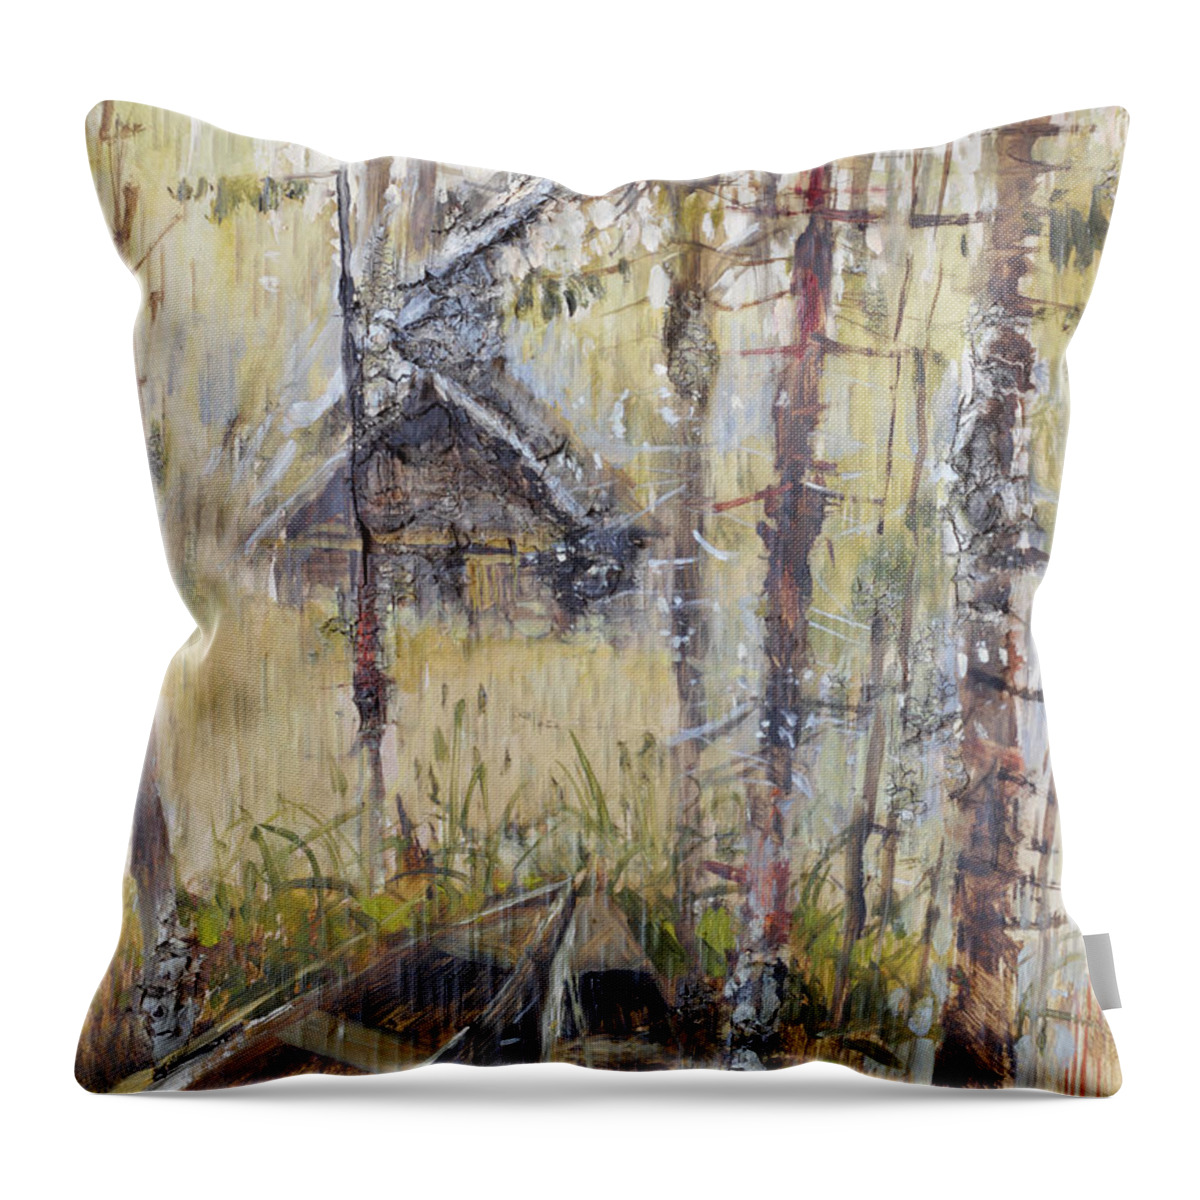 Russia Throw Pillow featuring the painting Two Boats by Ilya Kondrashov